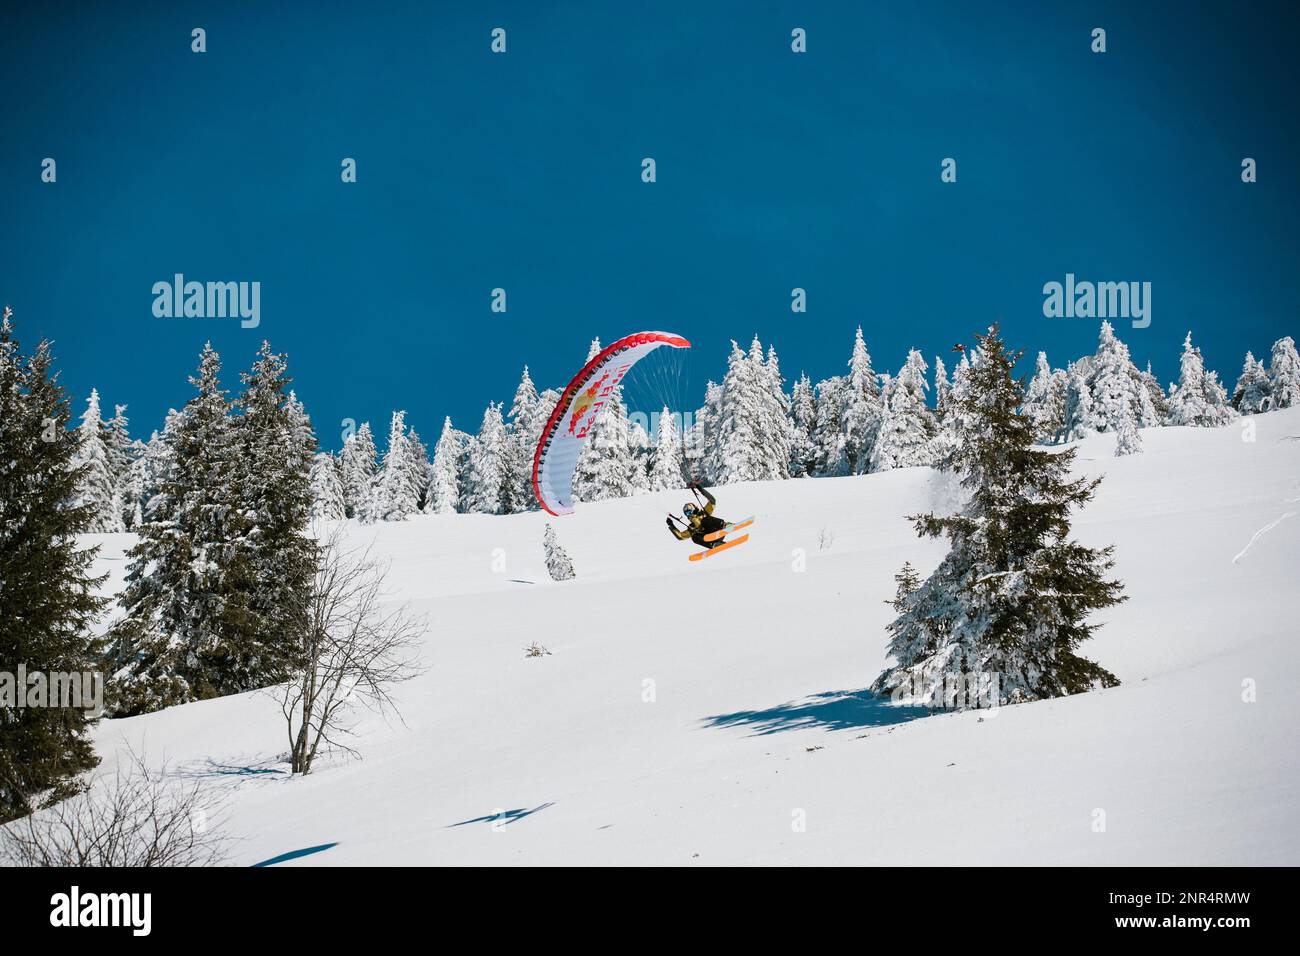 FPV drone pilot Tom 'Tomz' Panaiva joined with speed rider Valentin Delluc  in the French Alps at the popular winter resort Morzine. Speedriding mixes  freeskiing and paragliding with 27-year-old Delluc embracing the